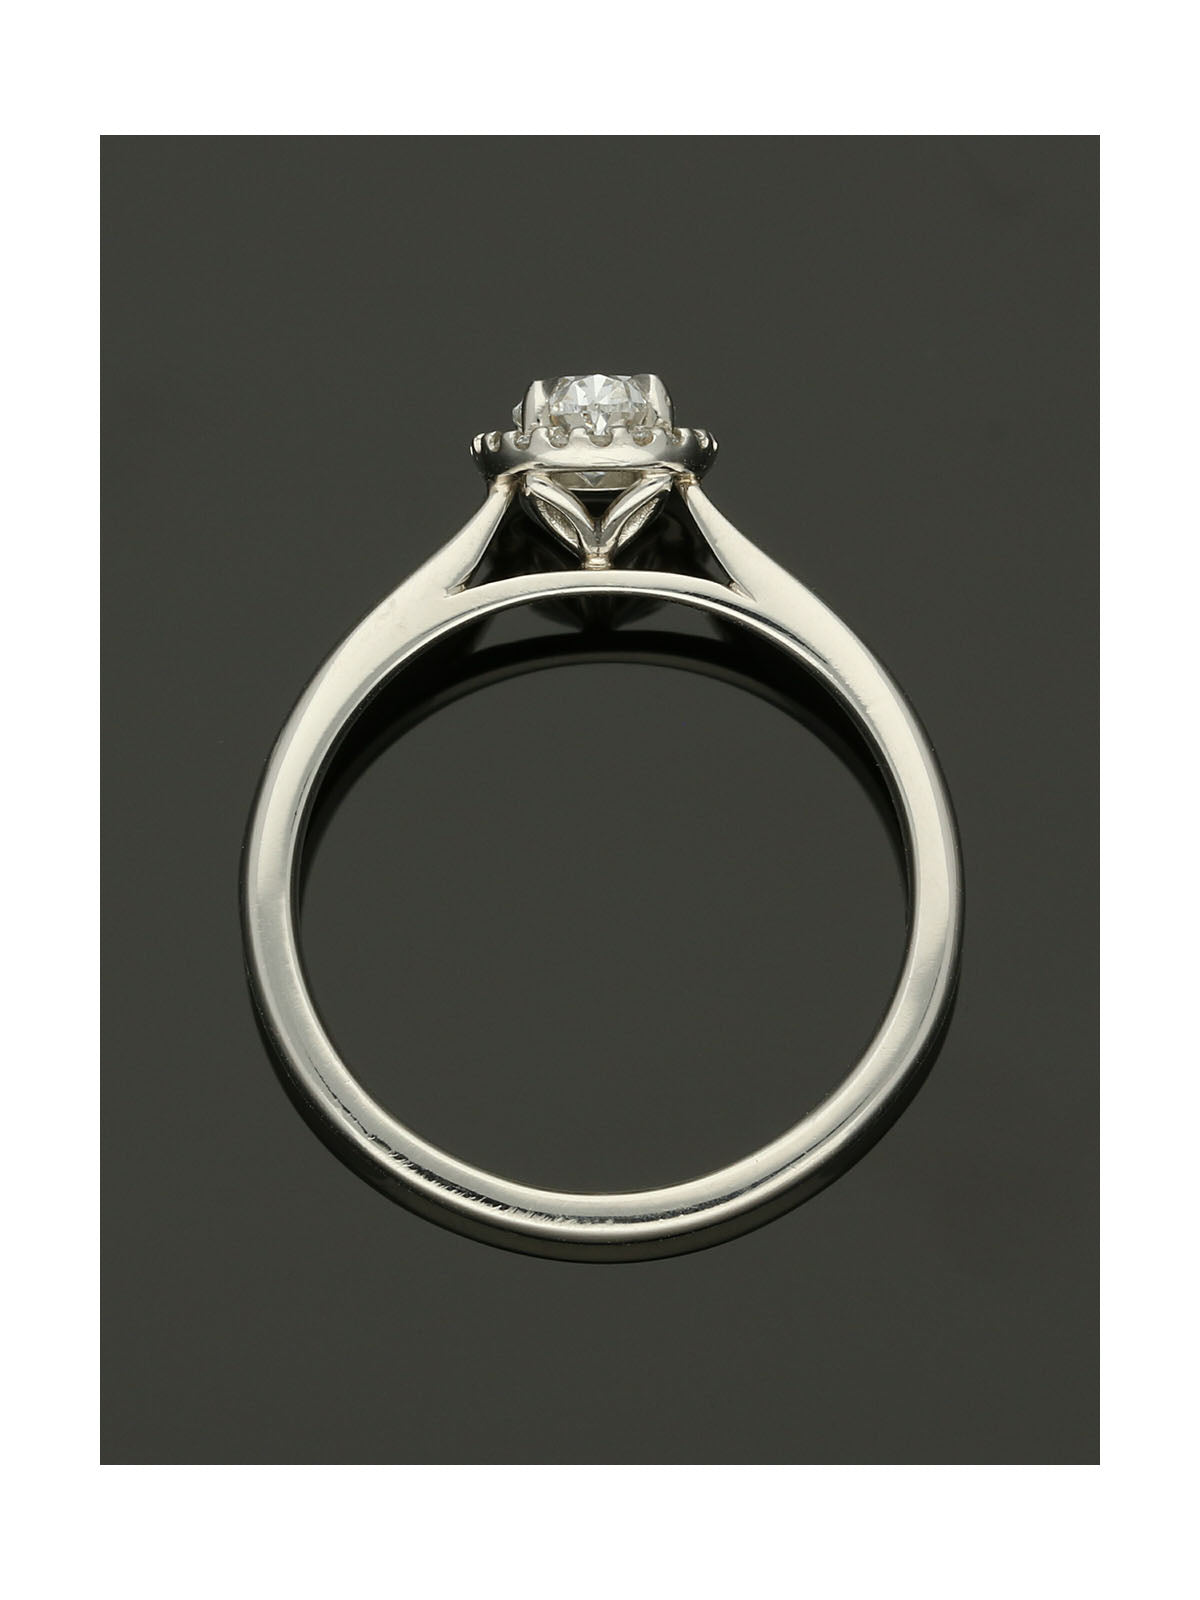 Diamond Halo Engagement Ring 0.54ct Certificated Oval Cut in Platinum